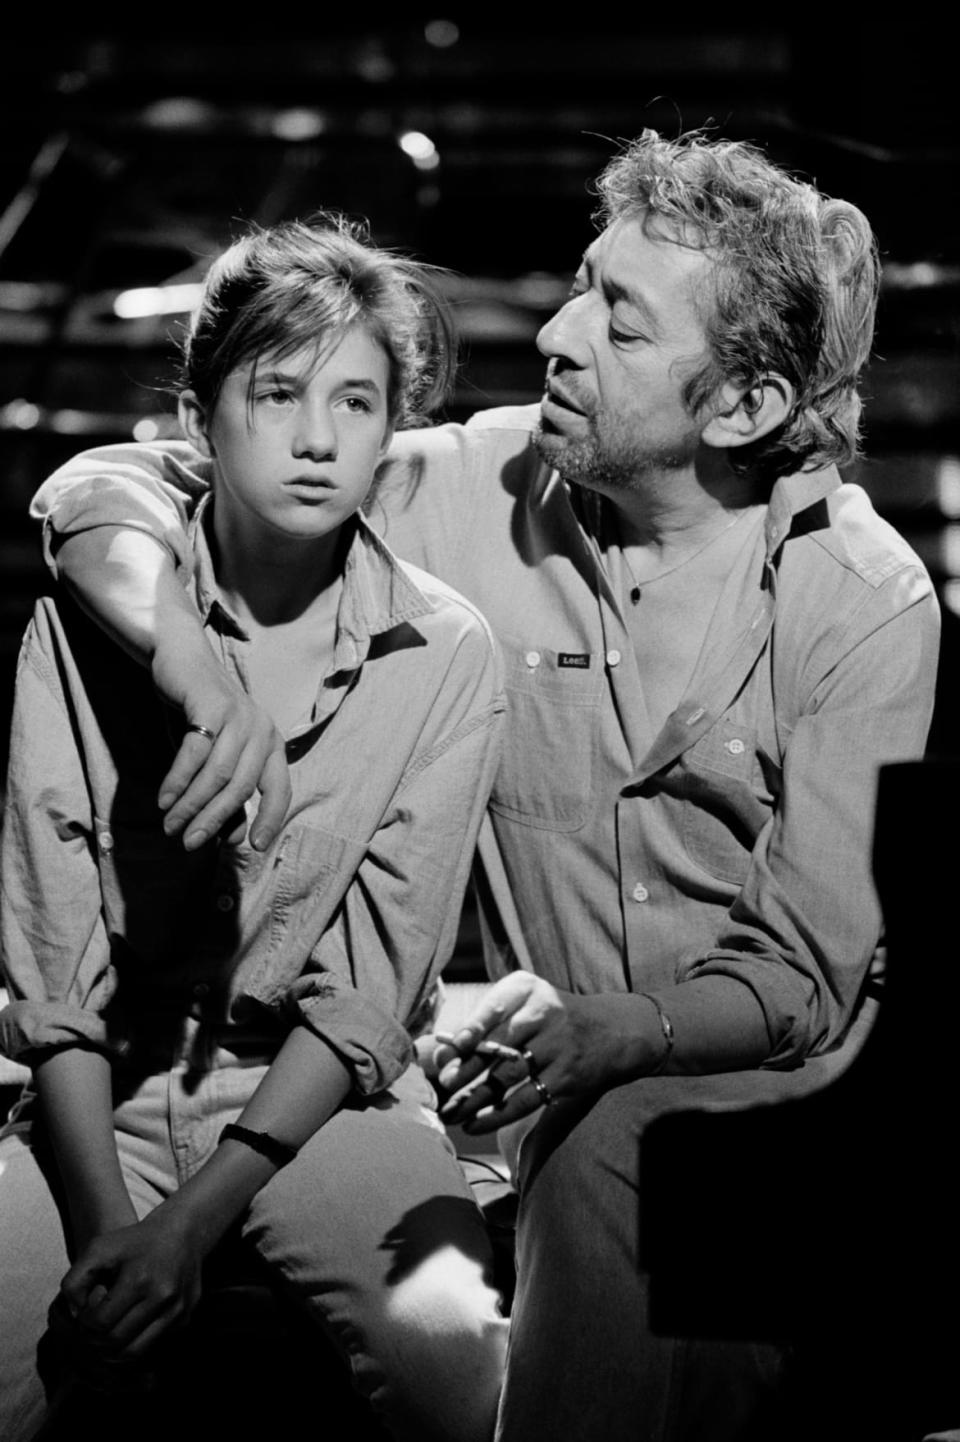 <div class="inline-image__caption"><p>Charlotte Gainsbourg with her father, Serge Gainsbourg. </p></div> <div class="inline-image__credit">Jean Pimentel/Kipa/Sygma via Getty</div>